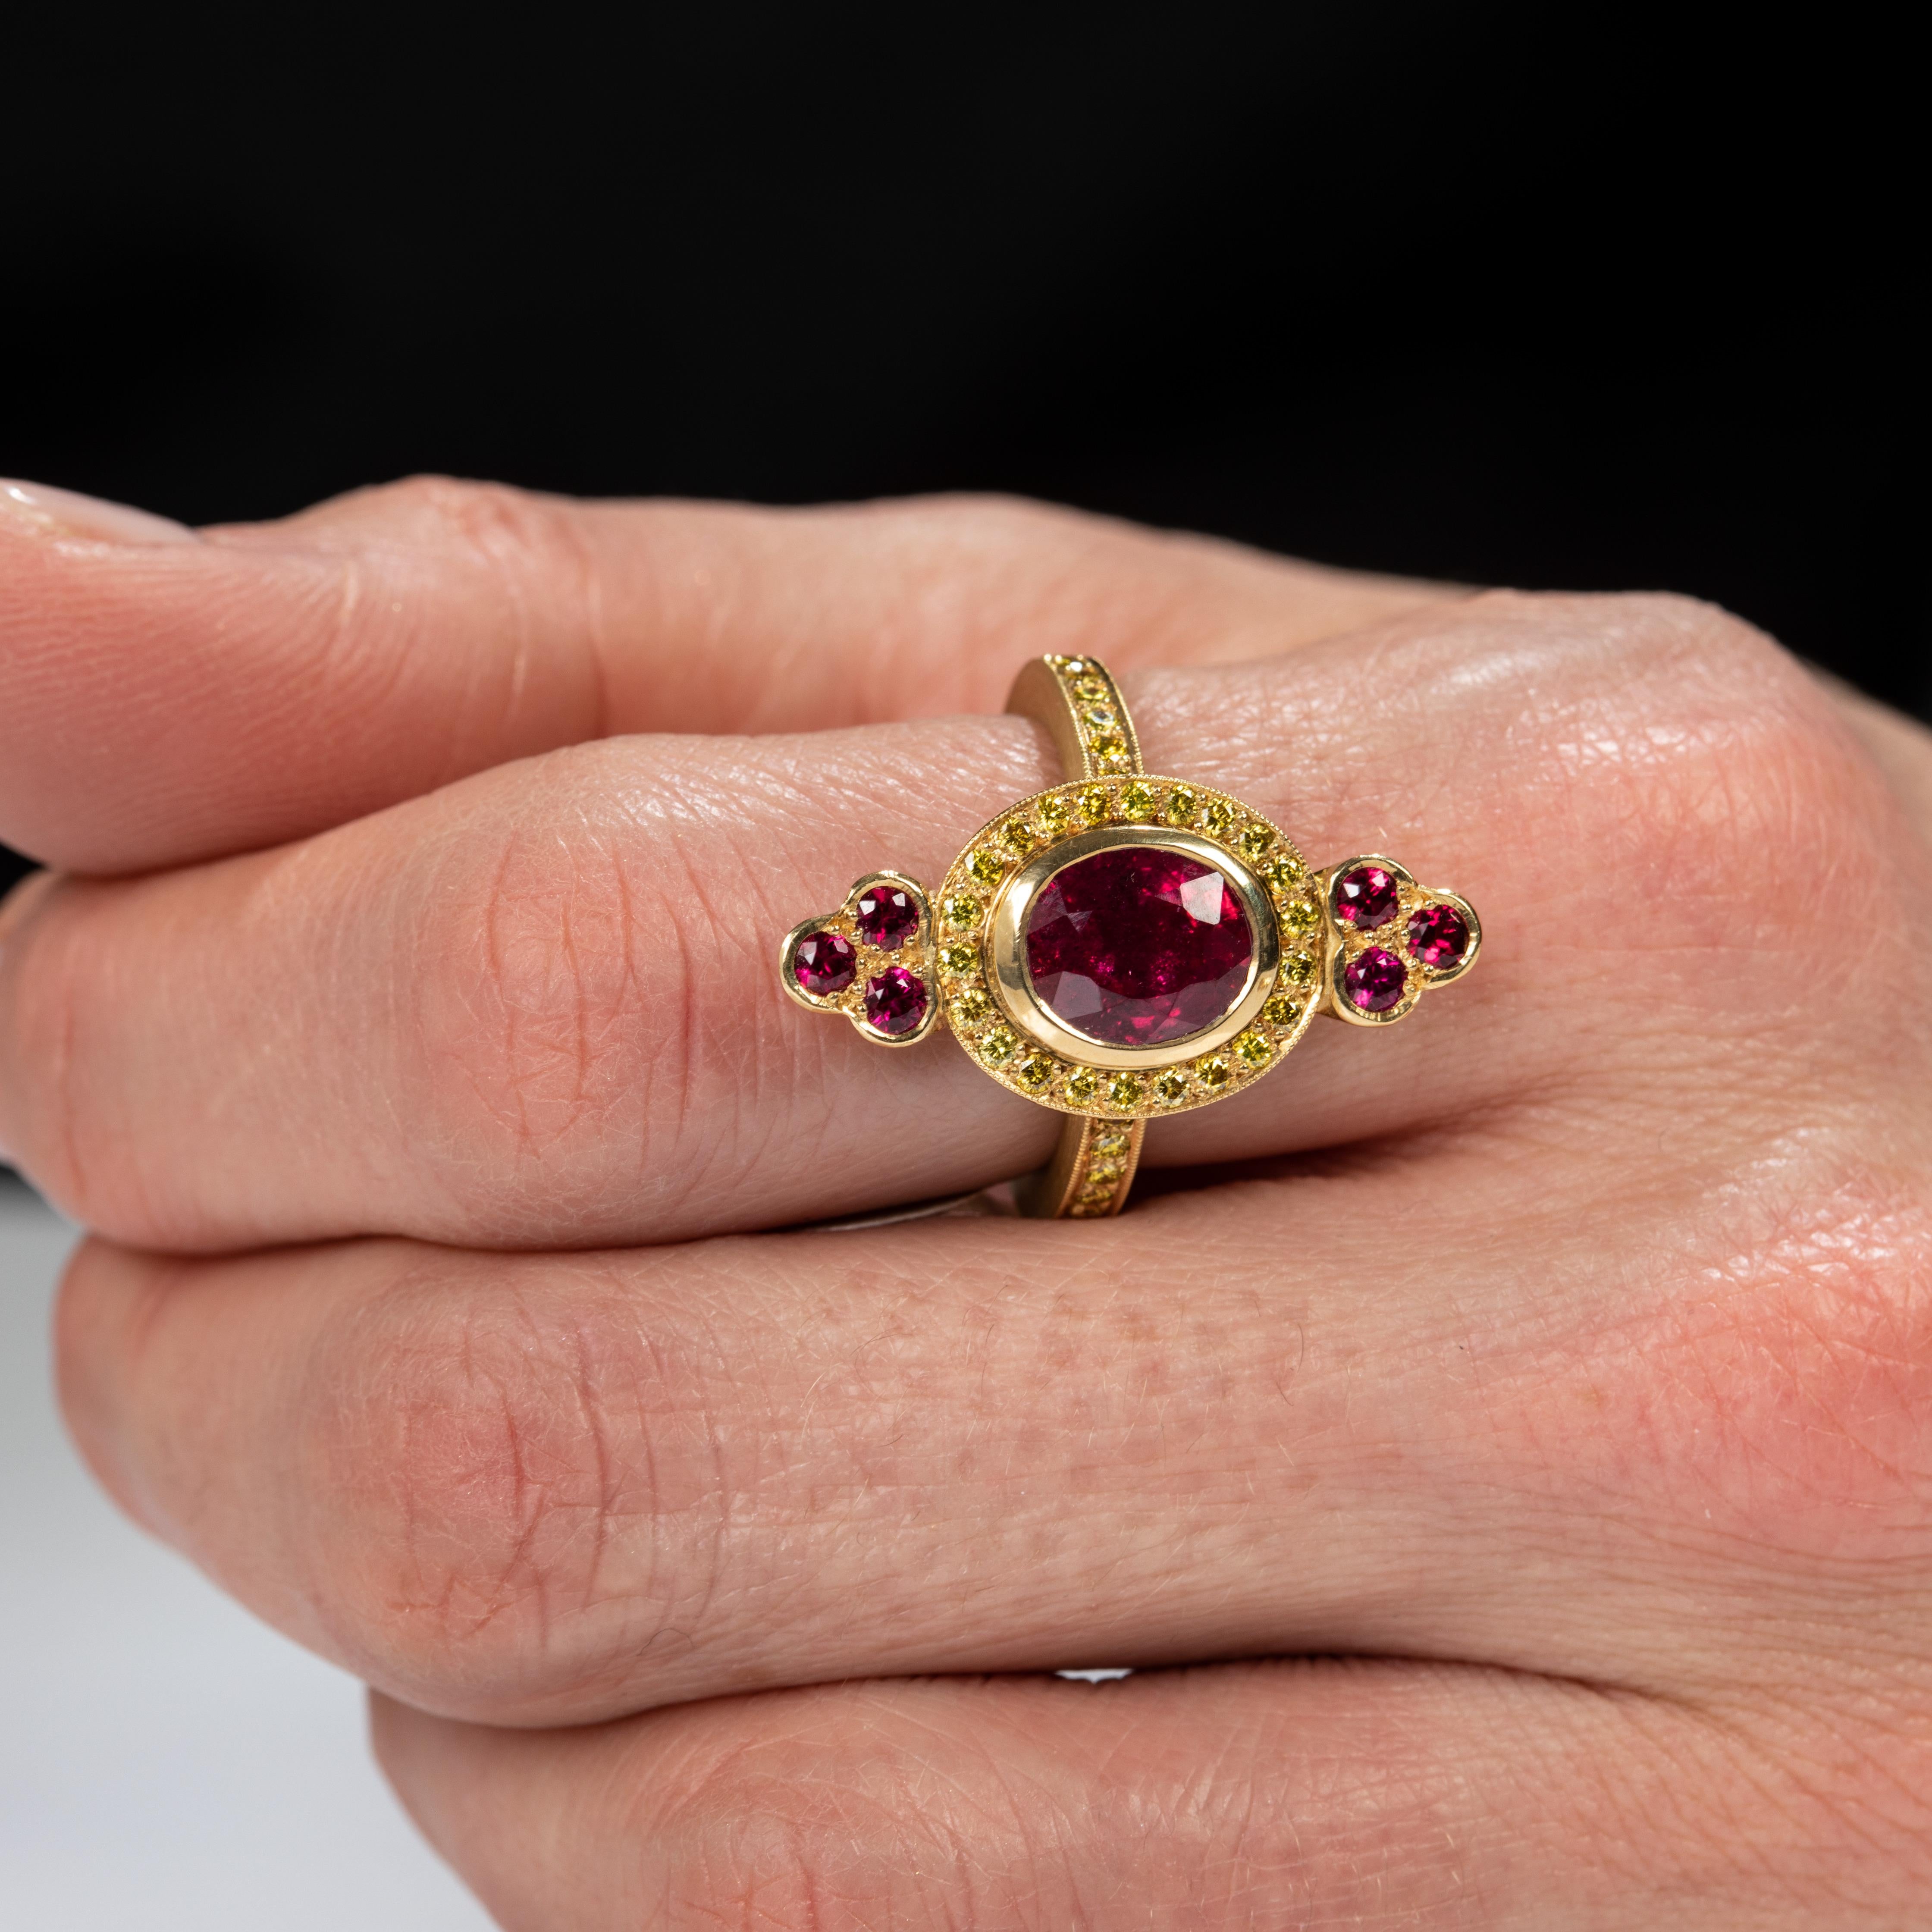 Feel like a diva in this one of a kind creation. A thin 18k yellow gold band, adorned with yellow accent diamonds is the gate way to the real gem - a bezel set Madagascar ruby, surrounded by a crown of sparkling yellow diamonds, and flanked by a